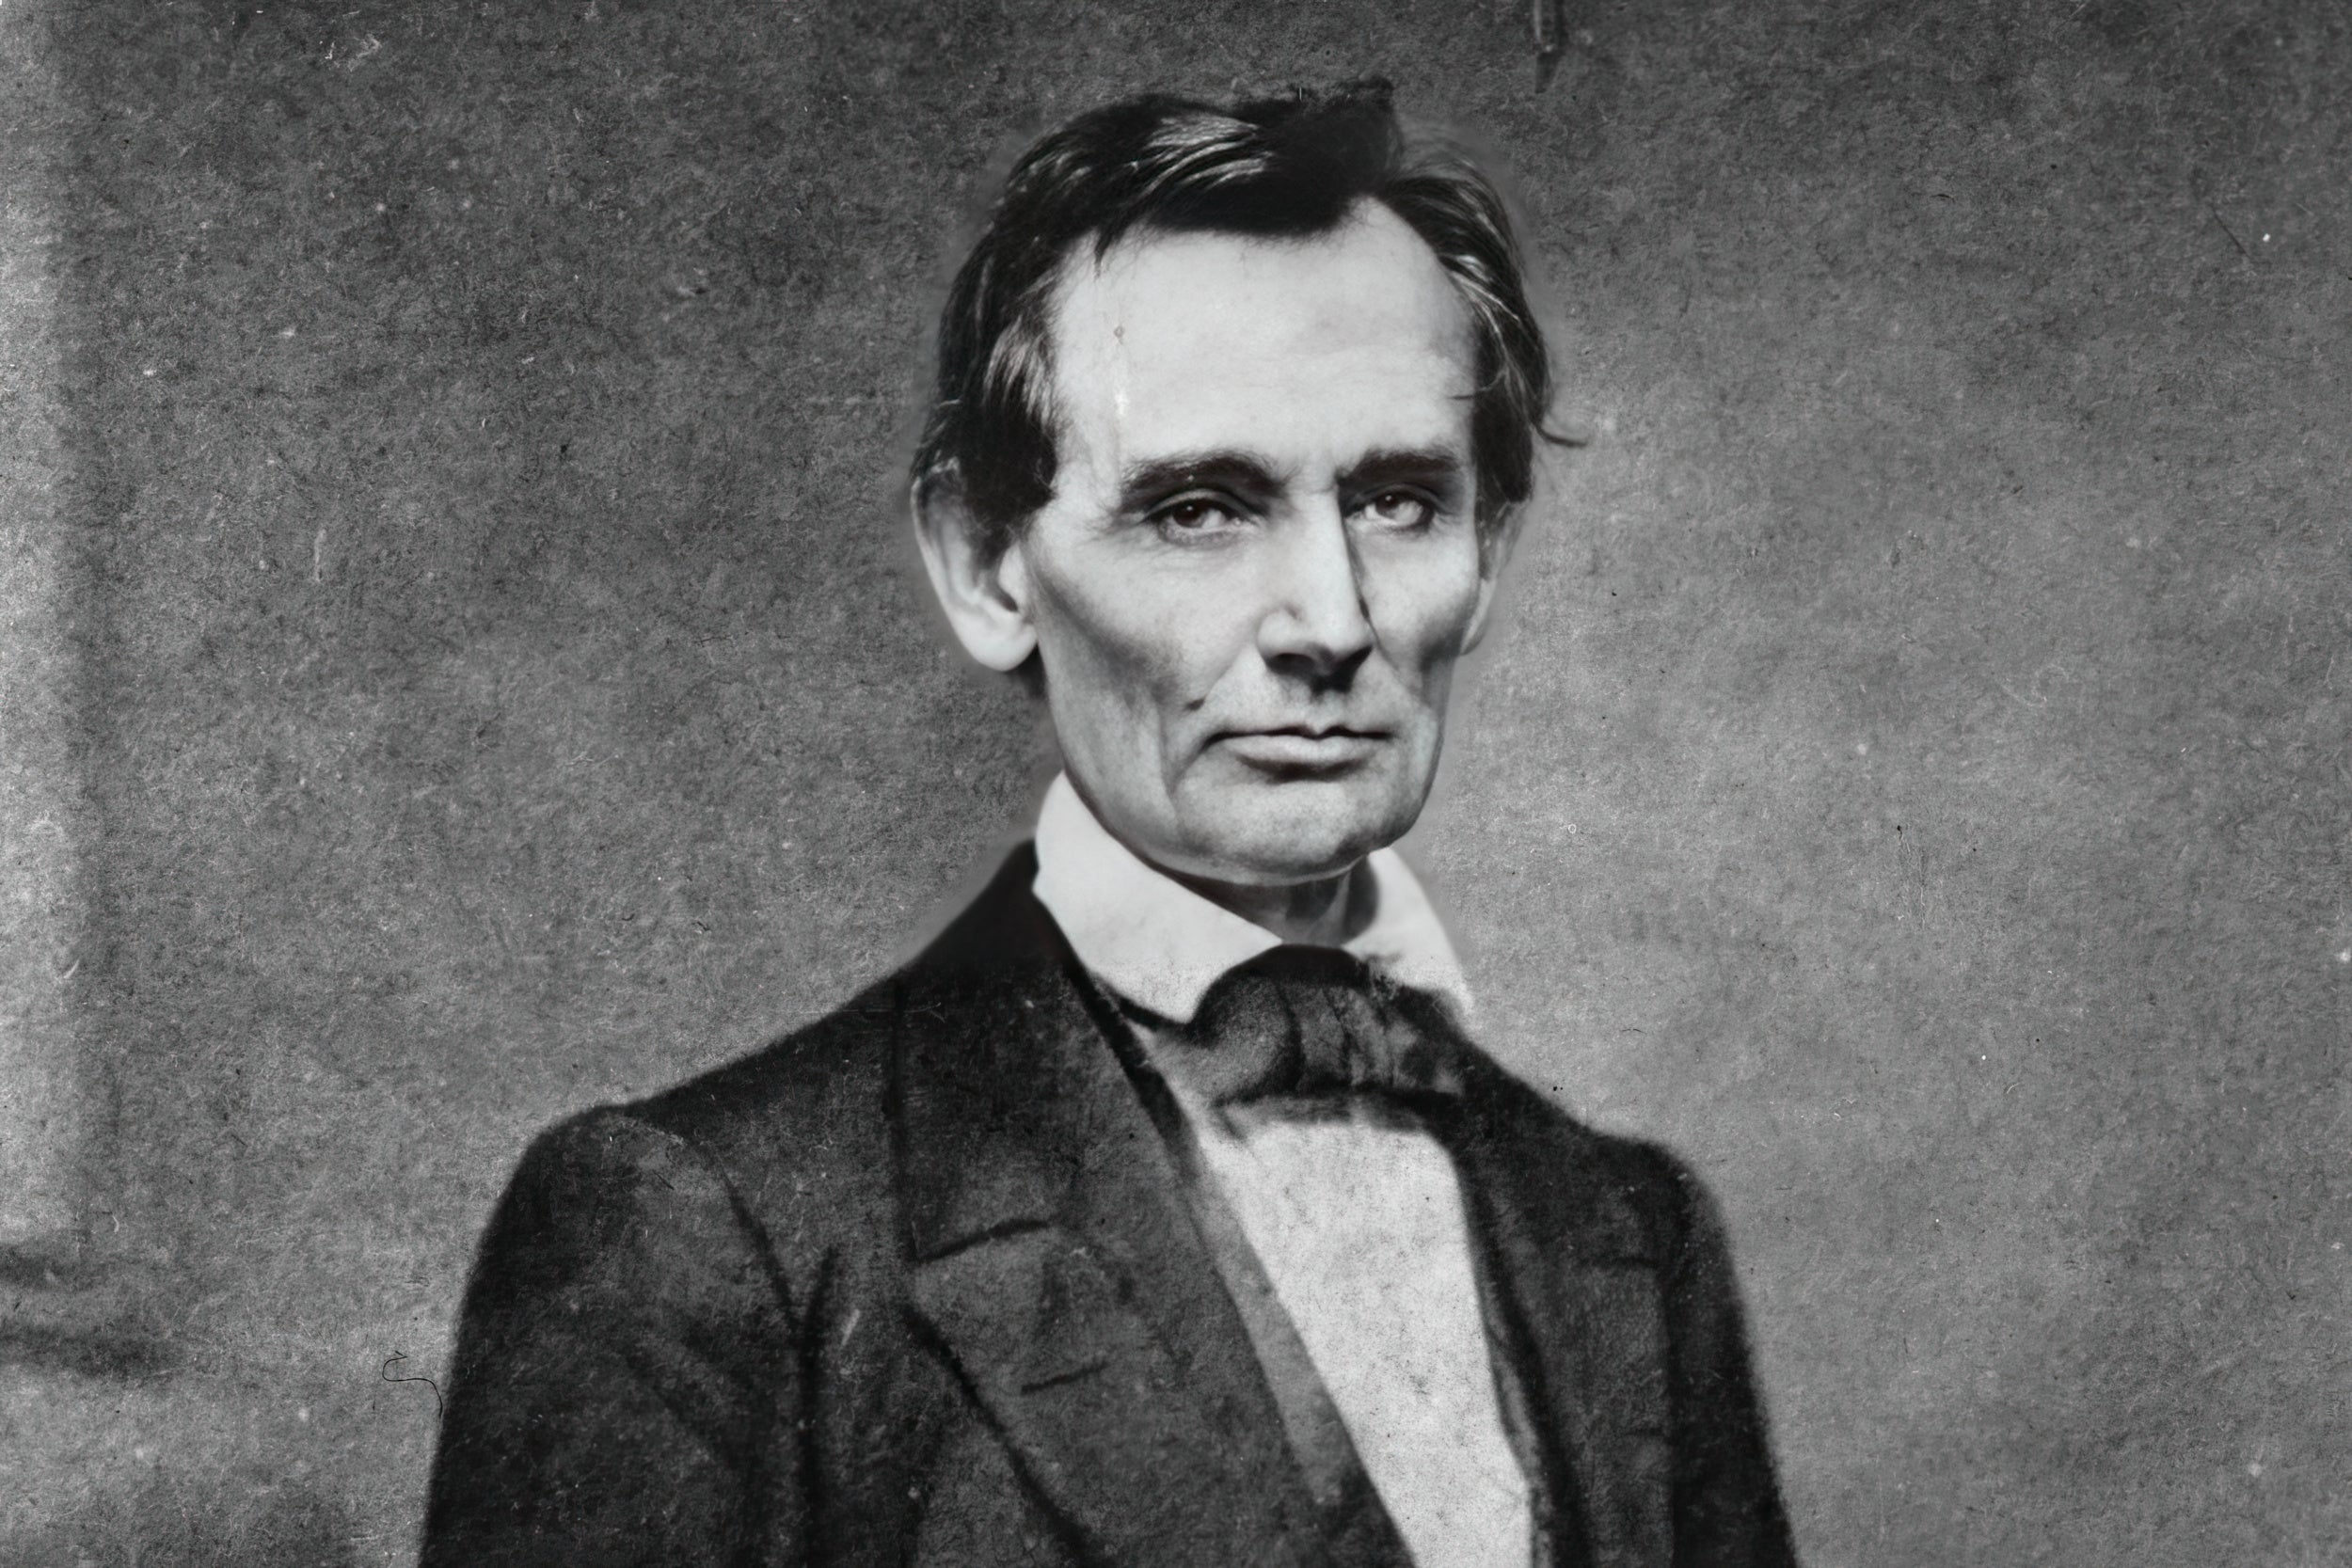 Lincoln's Cooper Union Speech - Image from Event